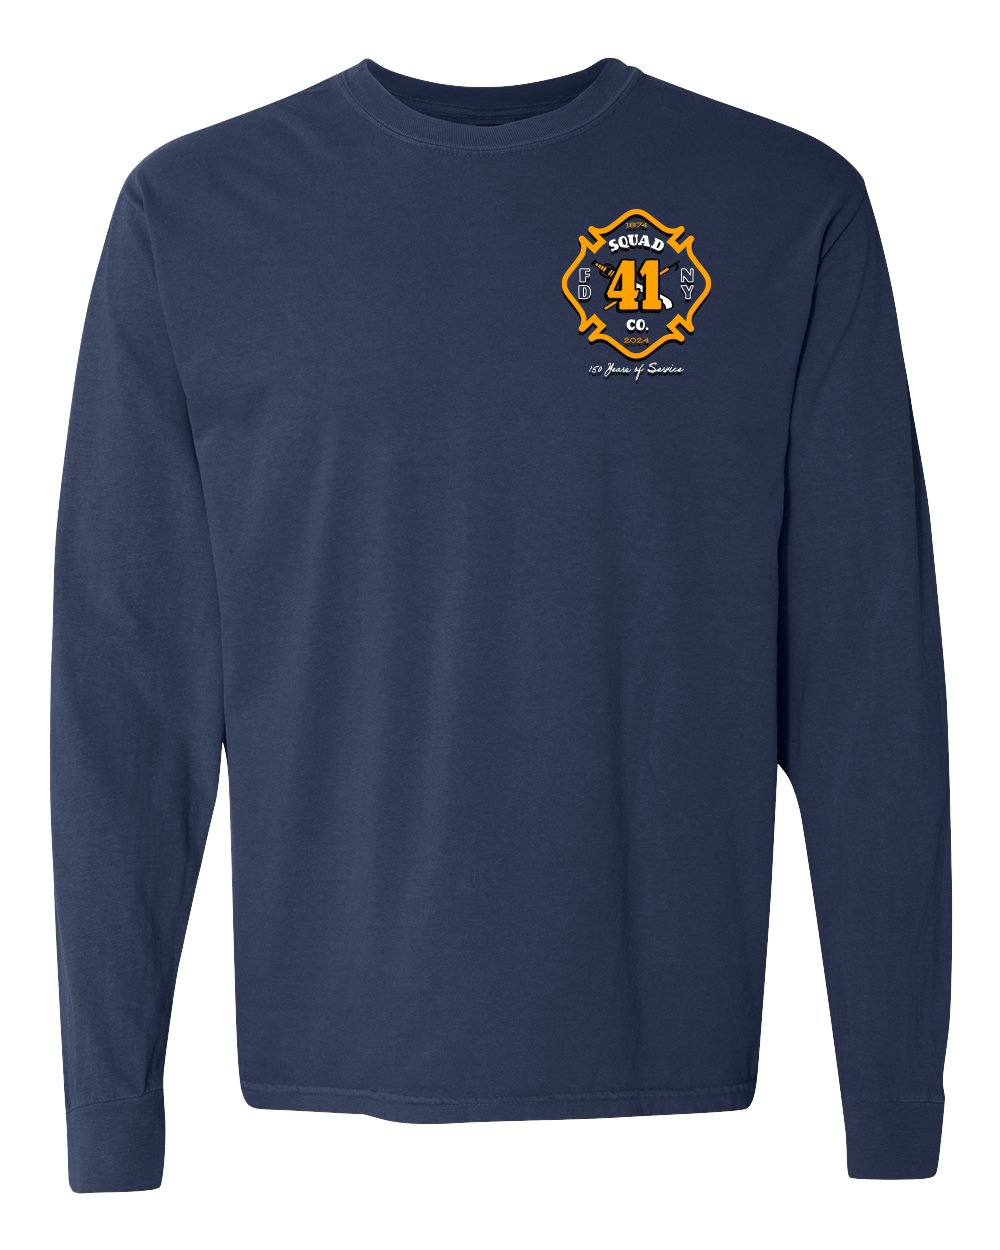 FDNY® Squad Co. 41 150th Anniversary Long Sleeve